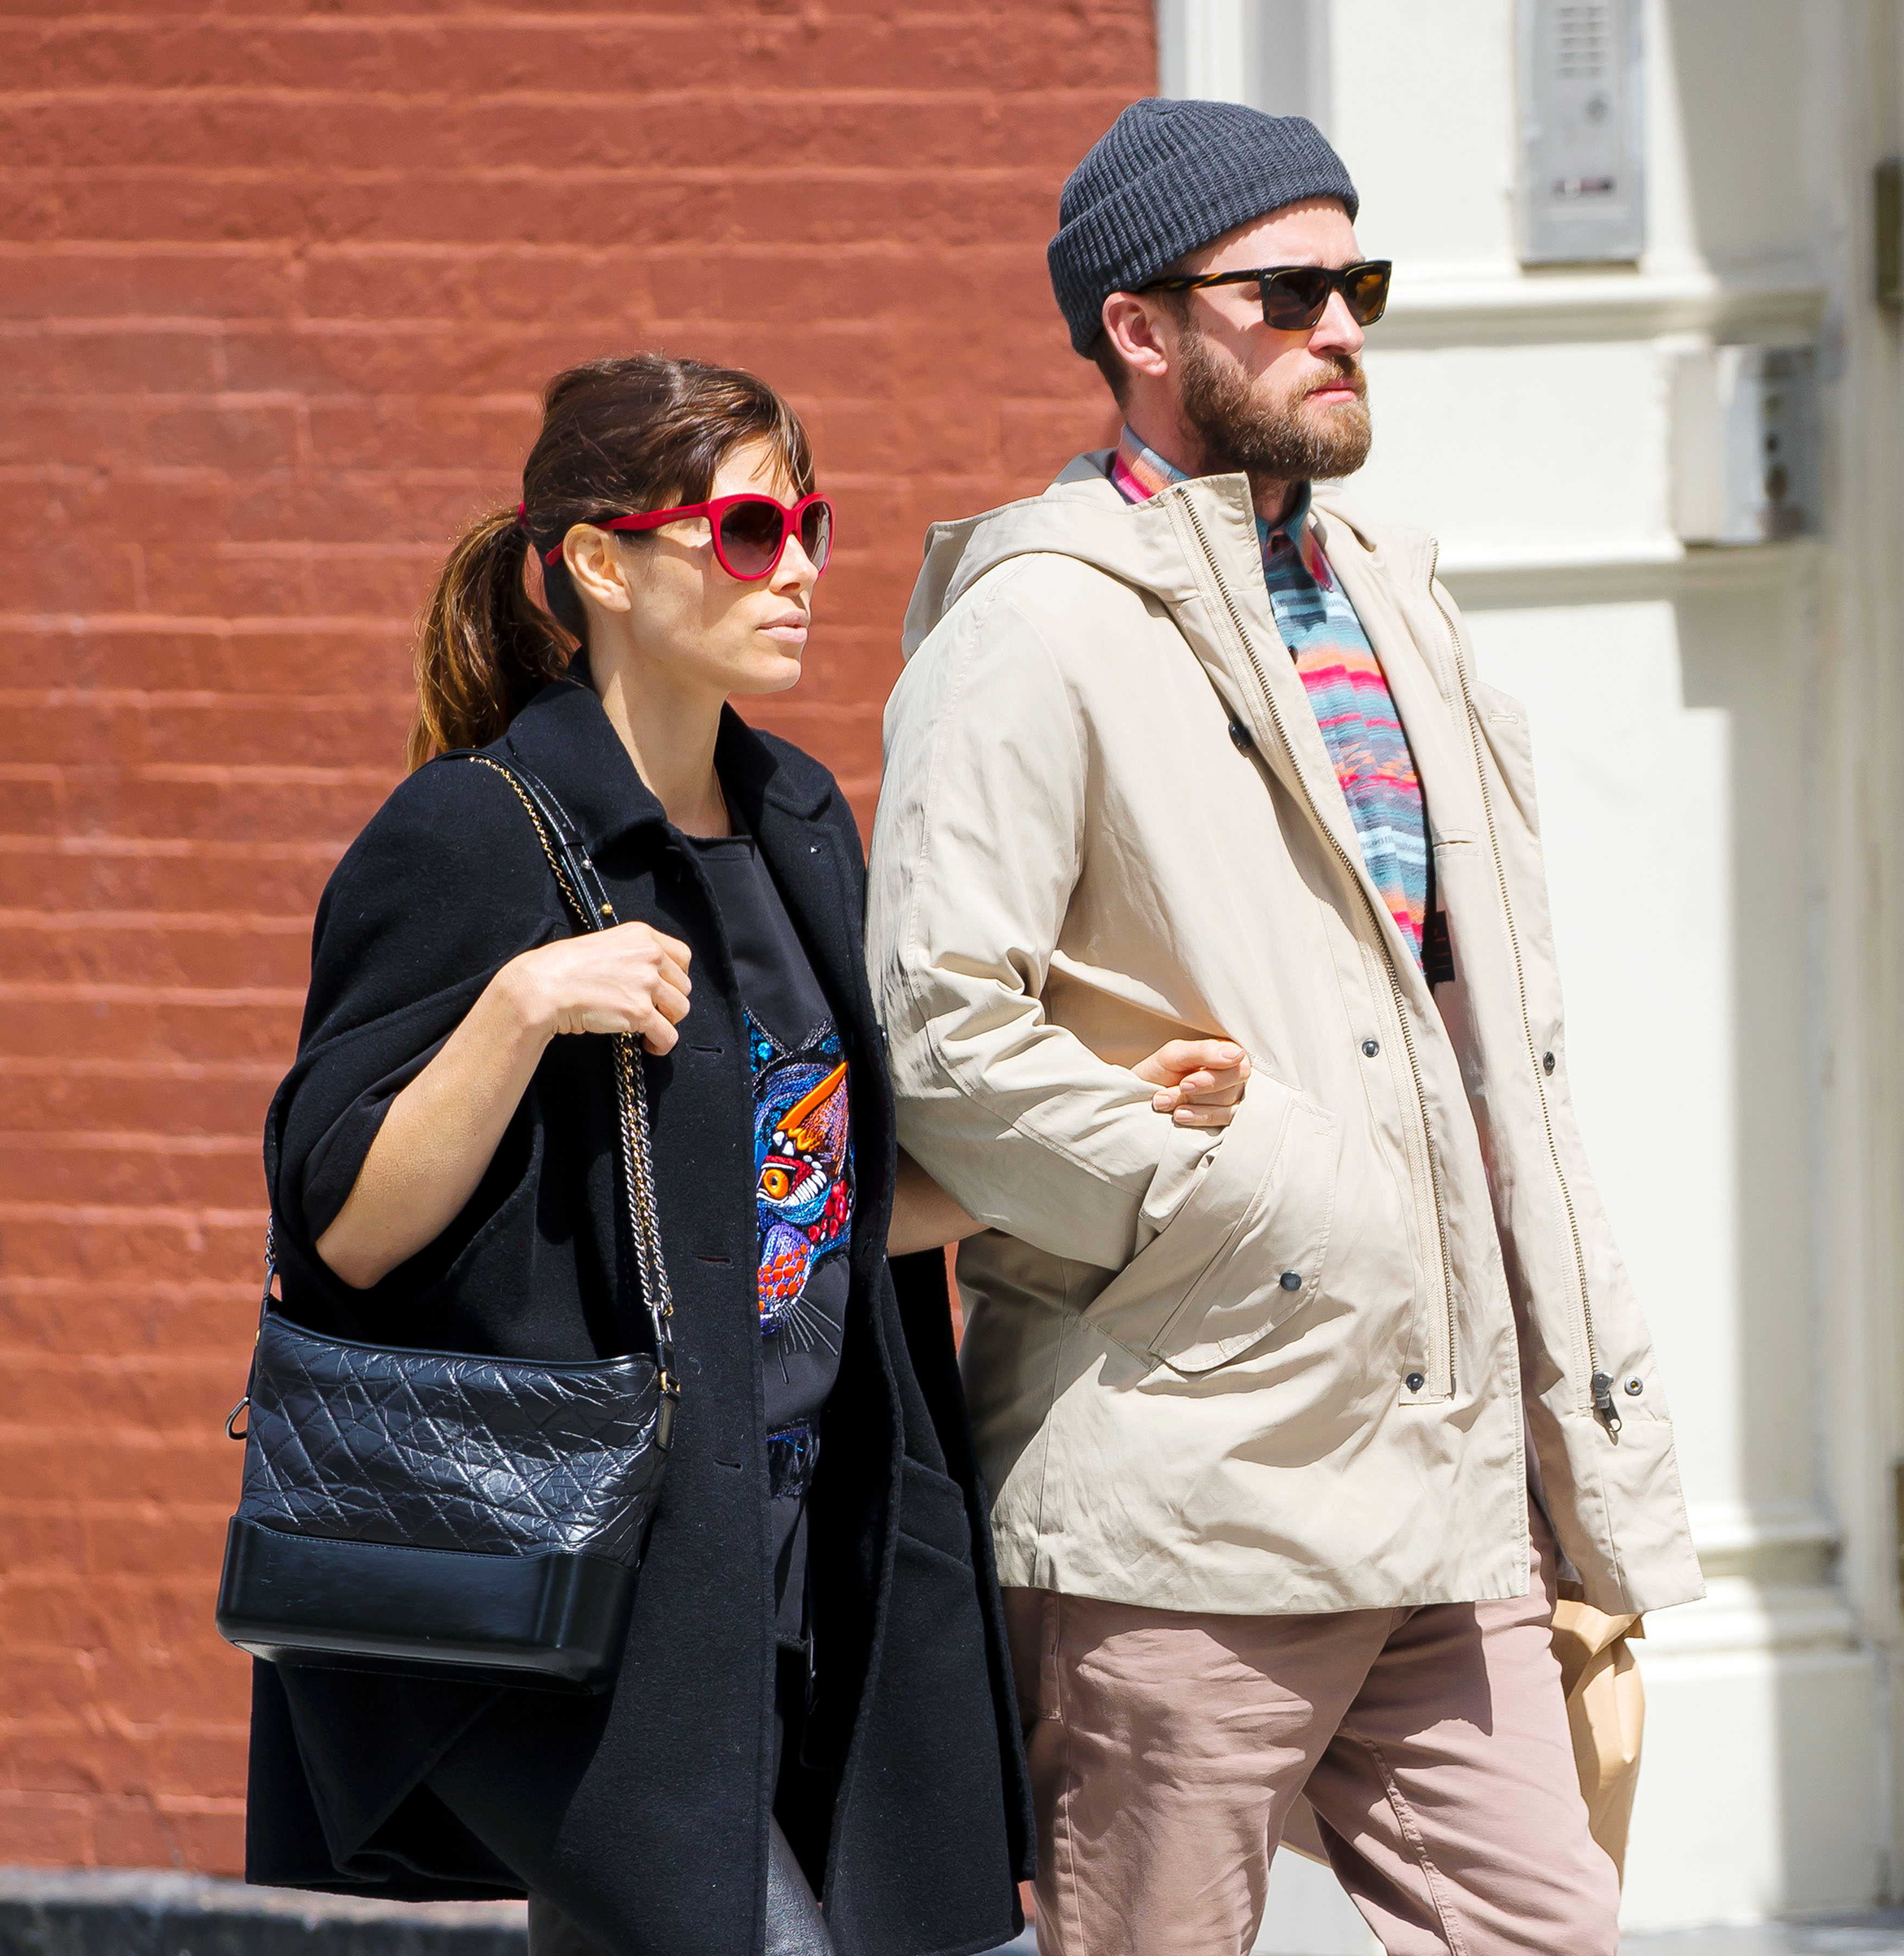 Jessica Biel out & about in New York City